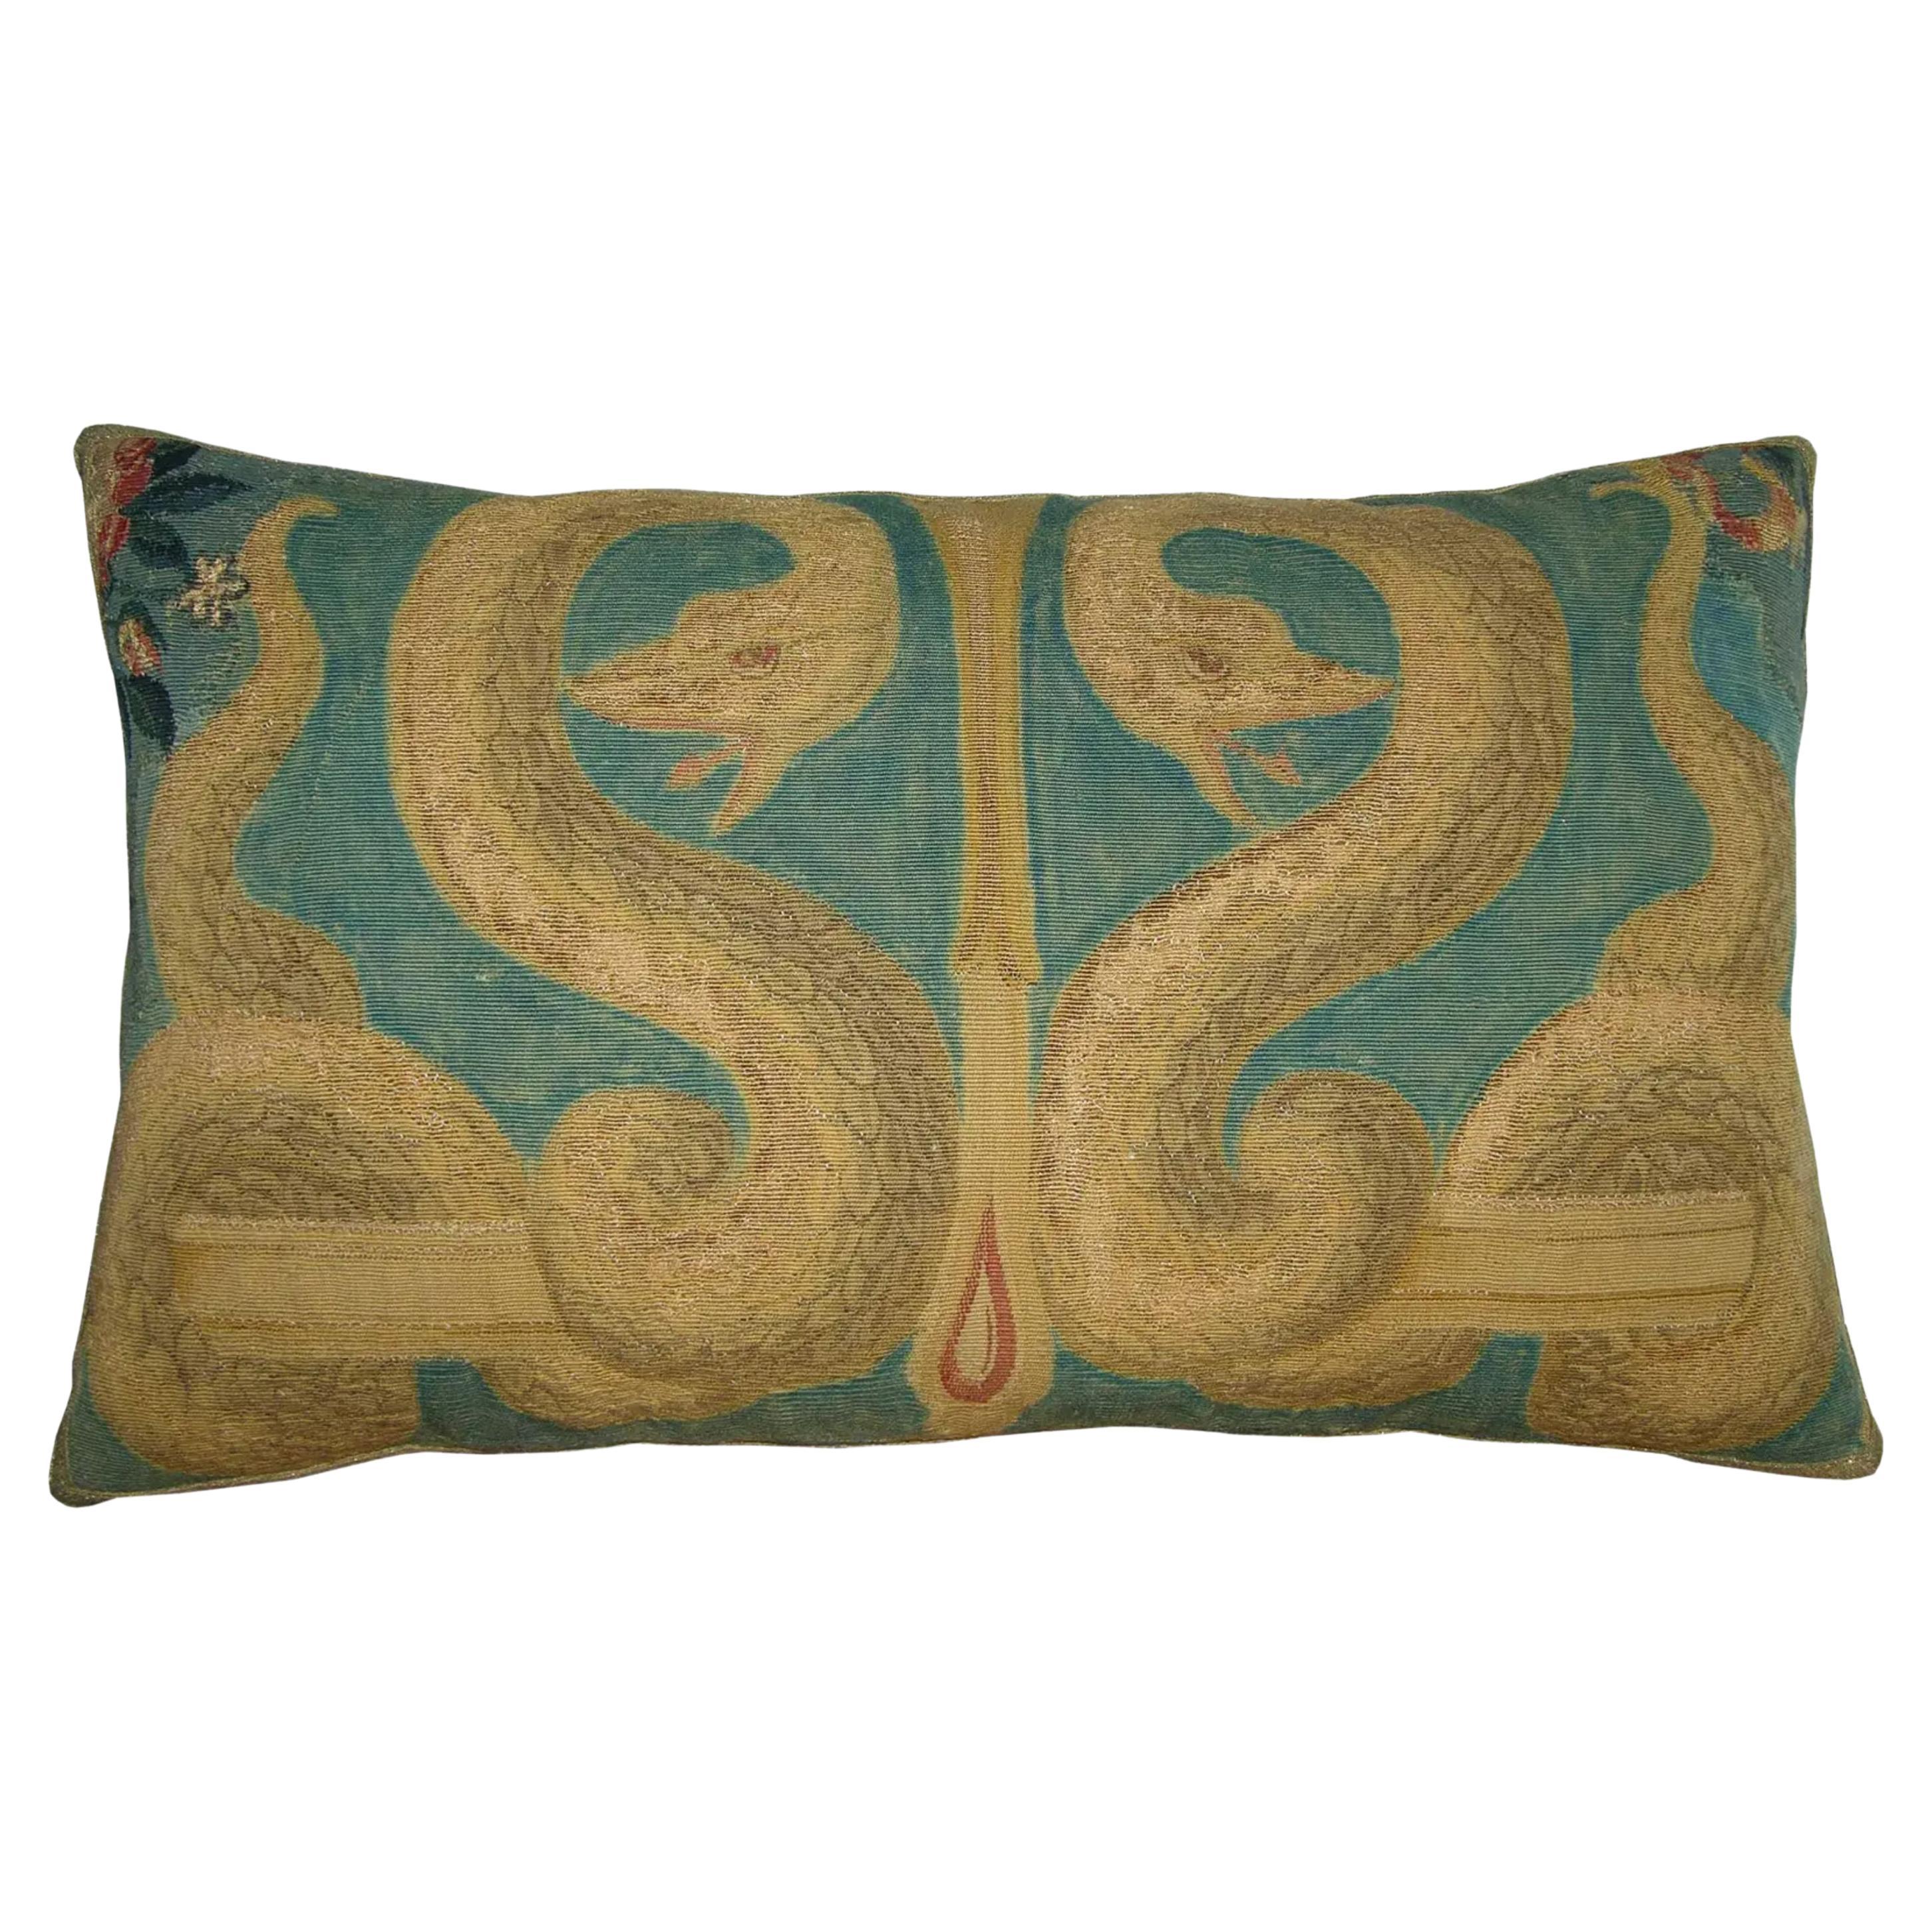 Antique 19th Century French Tapestry Pillow - 24'' X 15'' For Sale